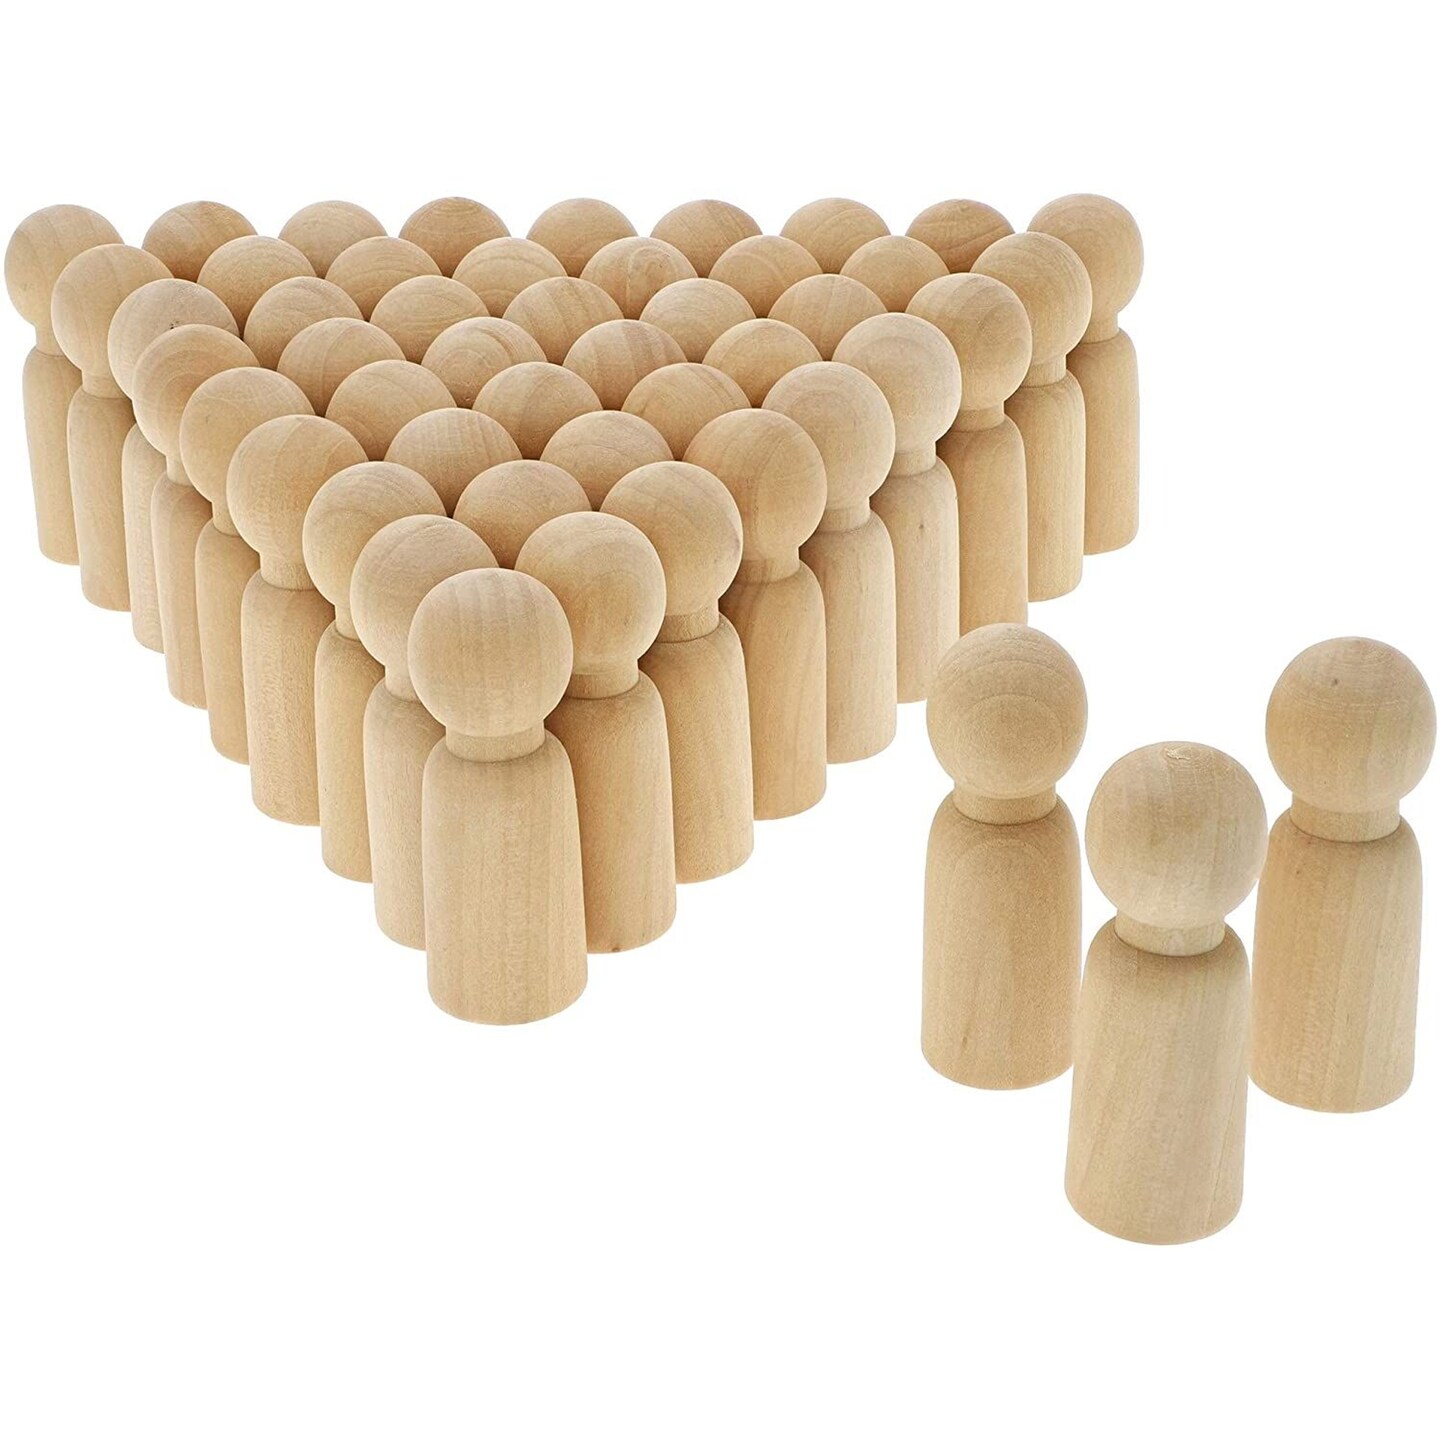 50 Pack Unfinished Wooden Peg Doll Bodies, Natural Wood Figures